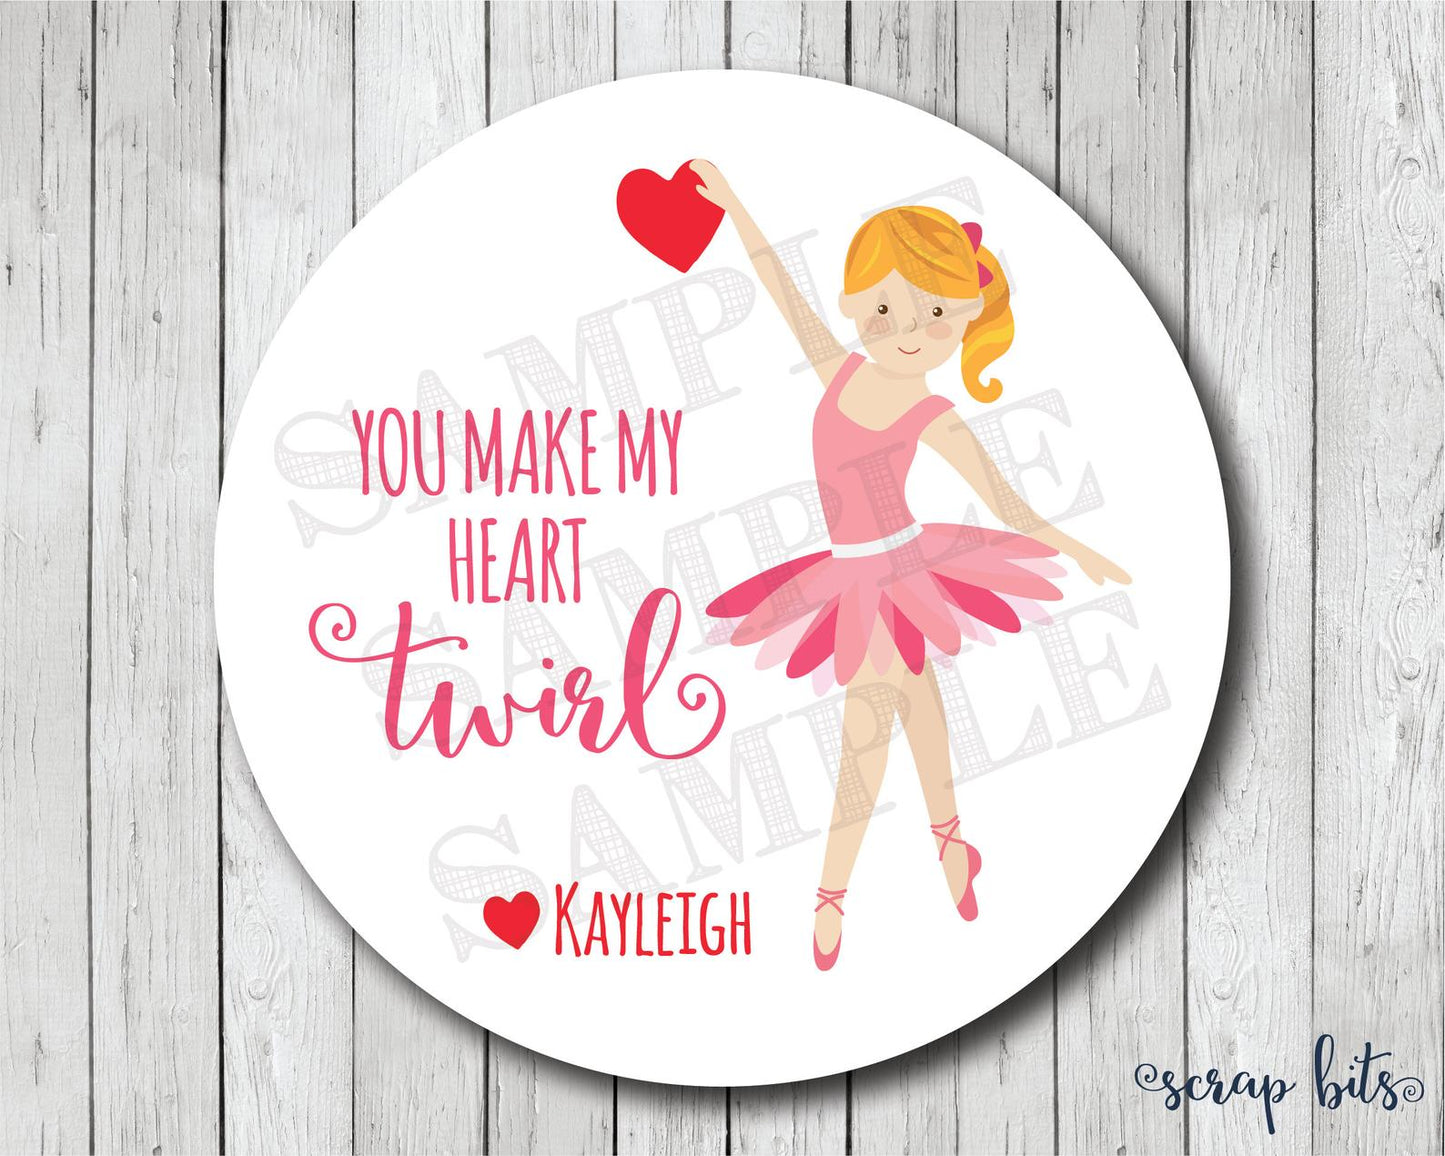 You Make My Heart Twirl . Ballerina Valentine's Day Stickers or Tags - Scrap Bits